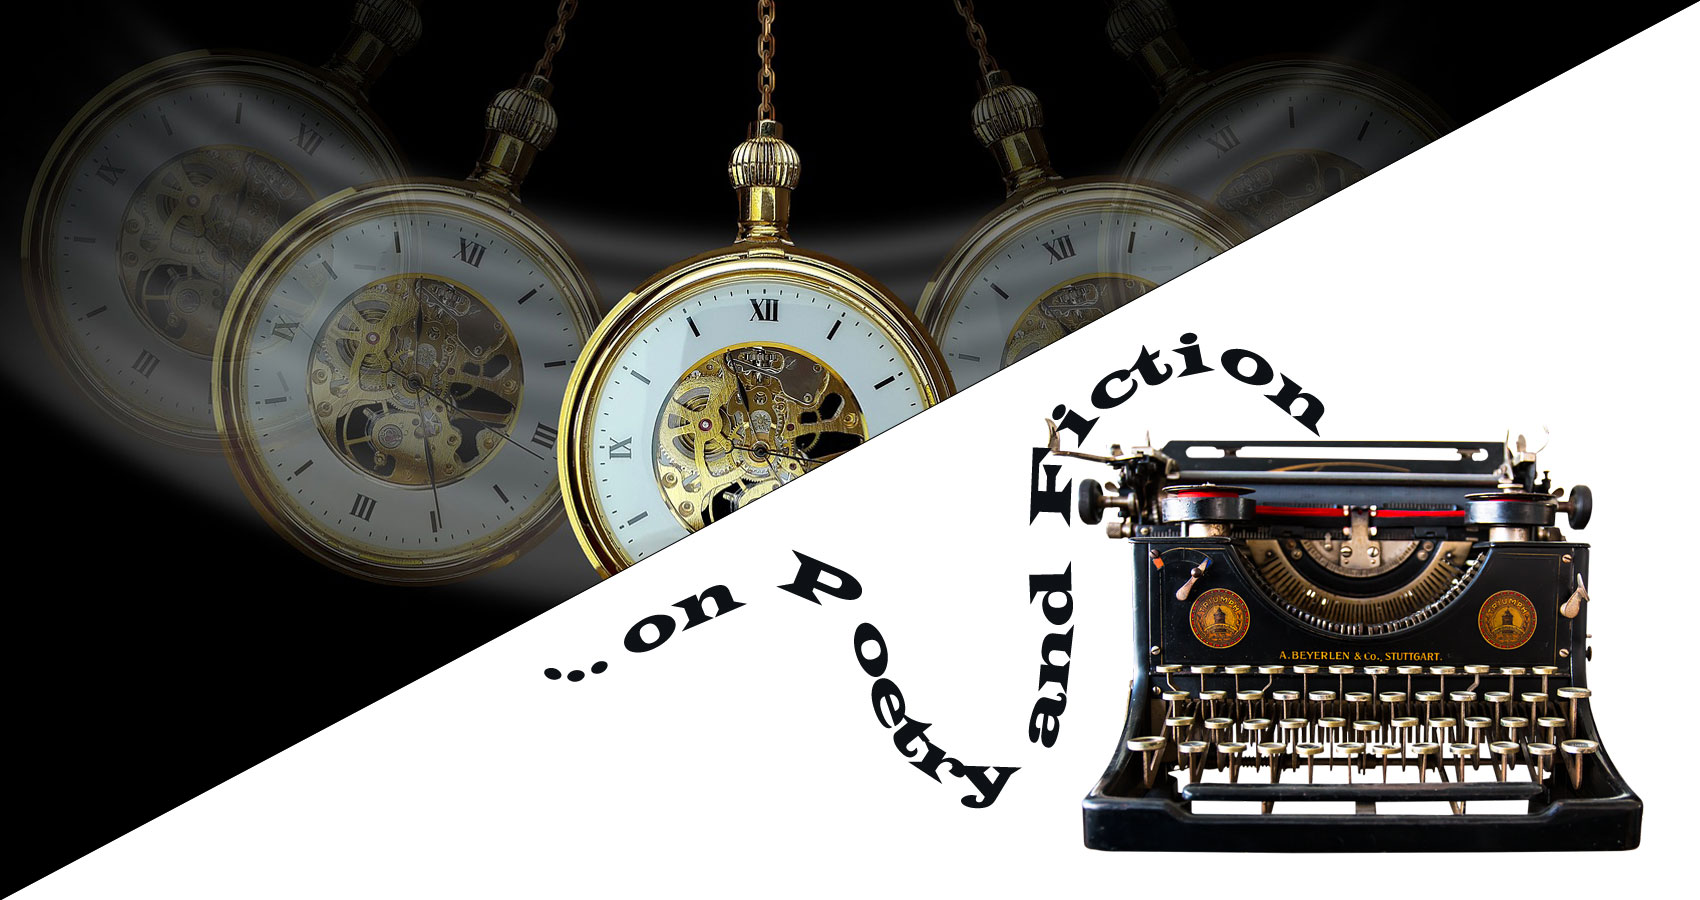 ...On Poetry and Fiction - Just “One Word” Away ("Pendulum"), editorial by Phyllis P. Colucci at Spillwords.com